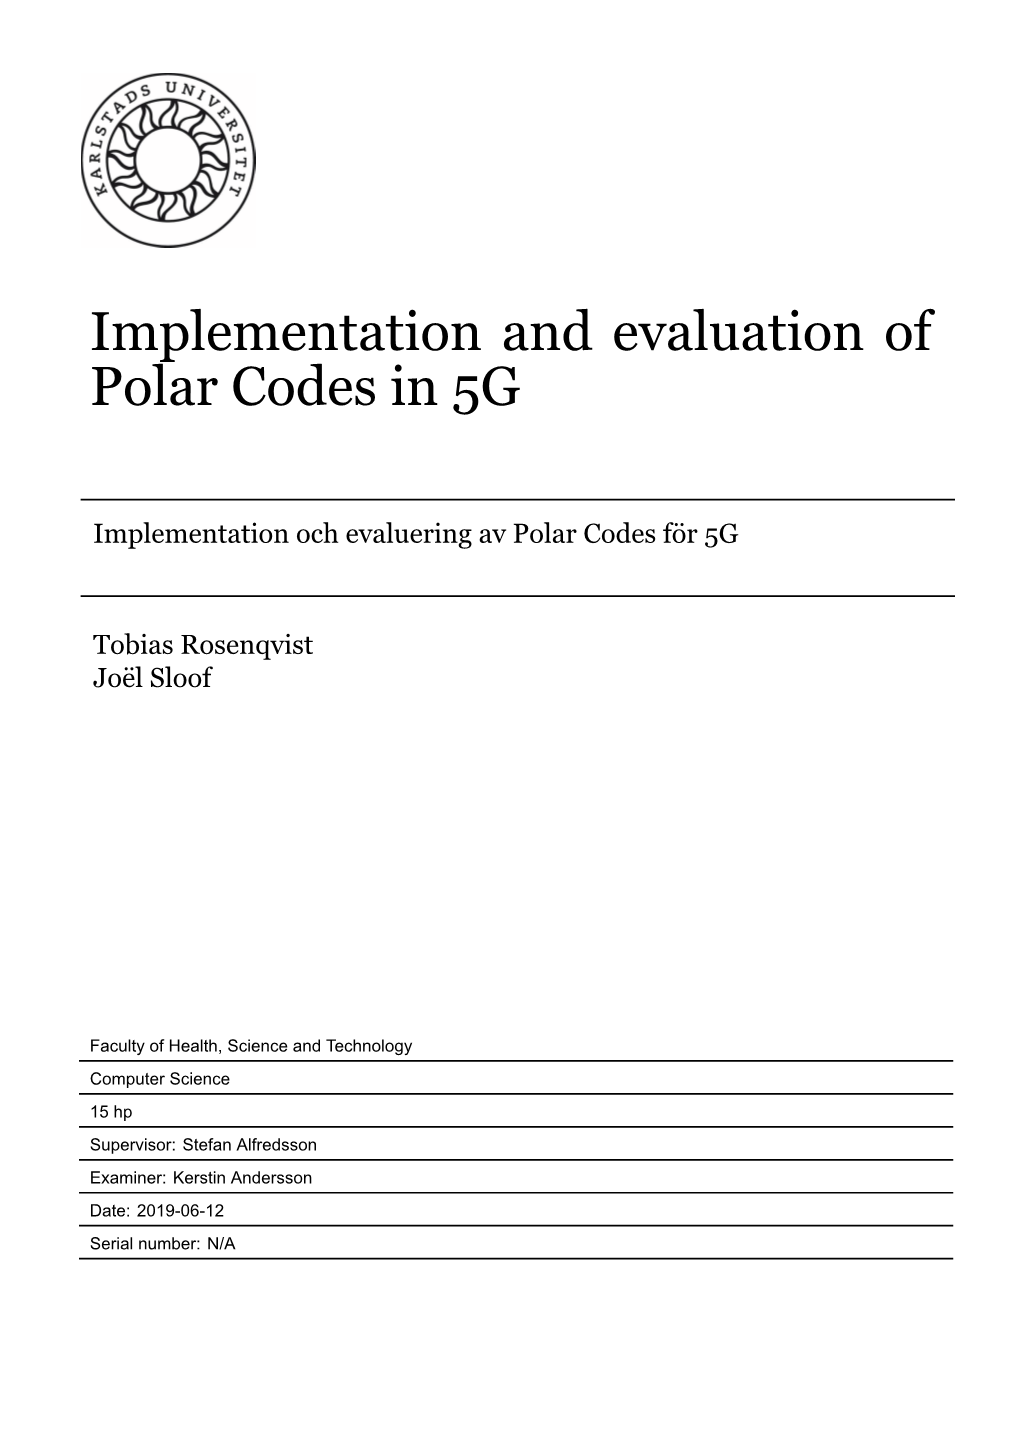 Implementation and Evaluation of Polar Codes in 5G